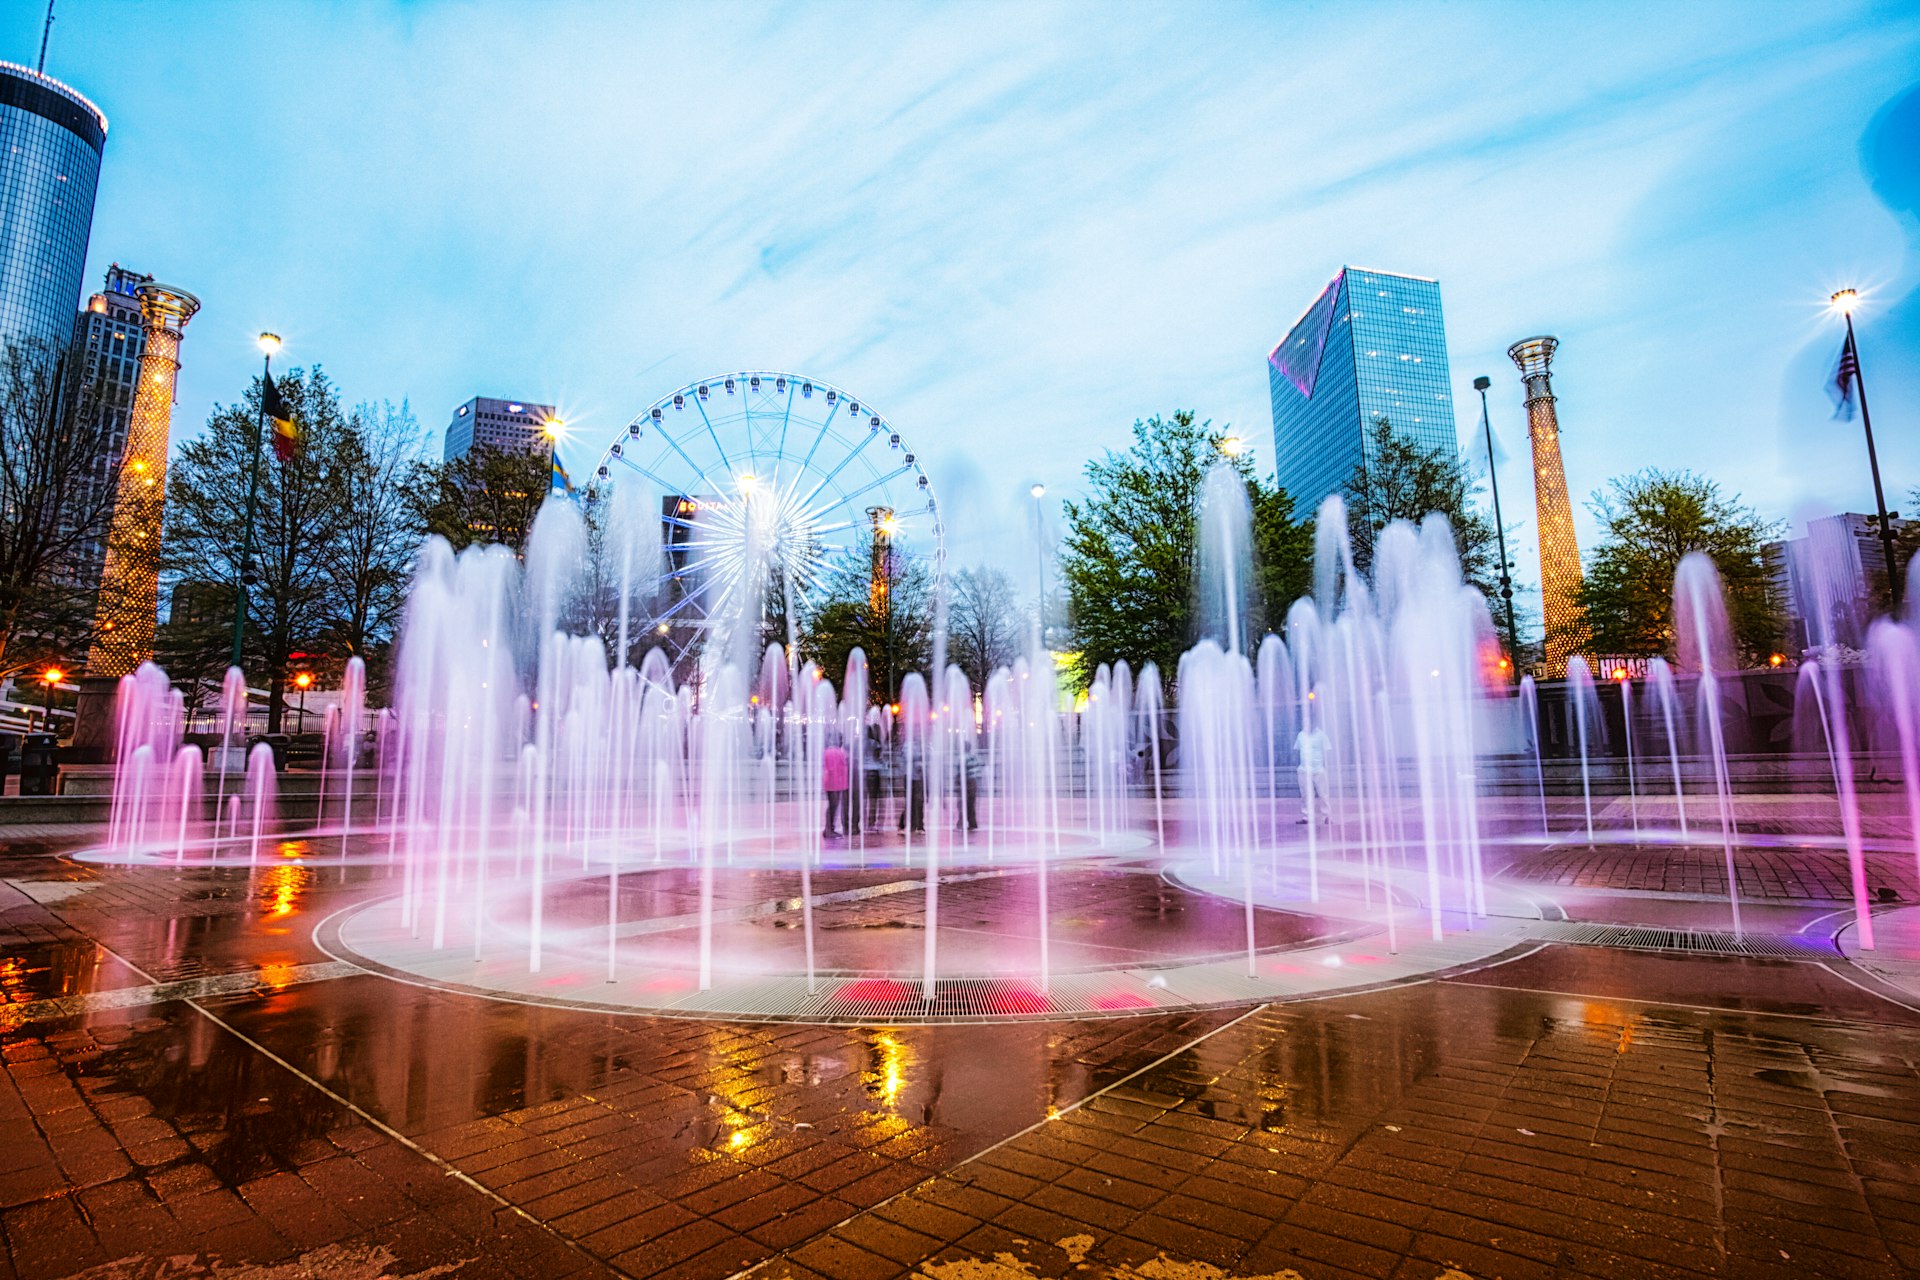 Fountains in the shape of the Olympic Rings shoot water upwards at Centennial Olympic Park at dusk